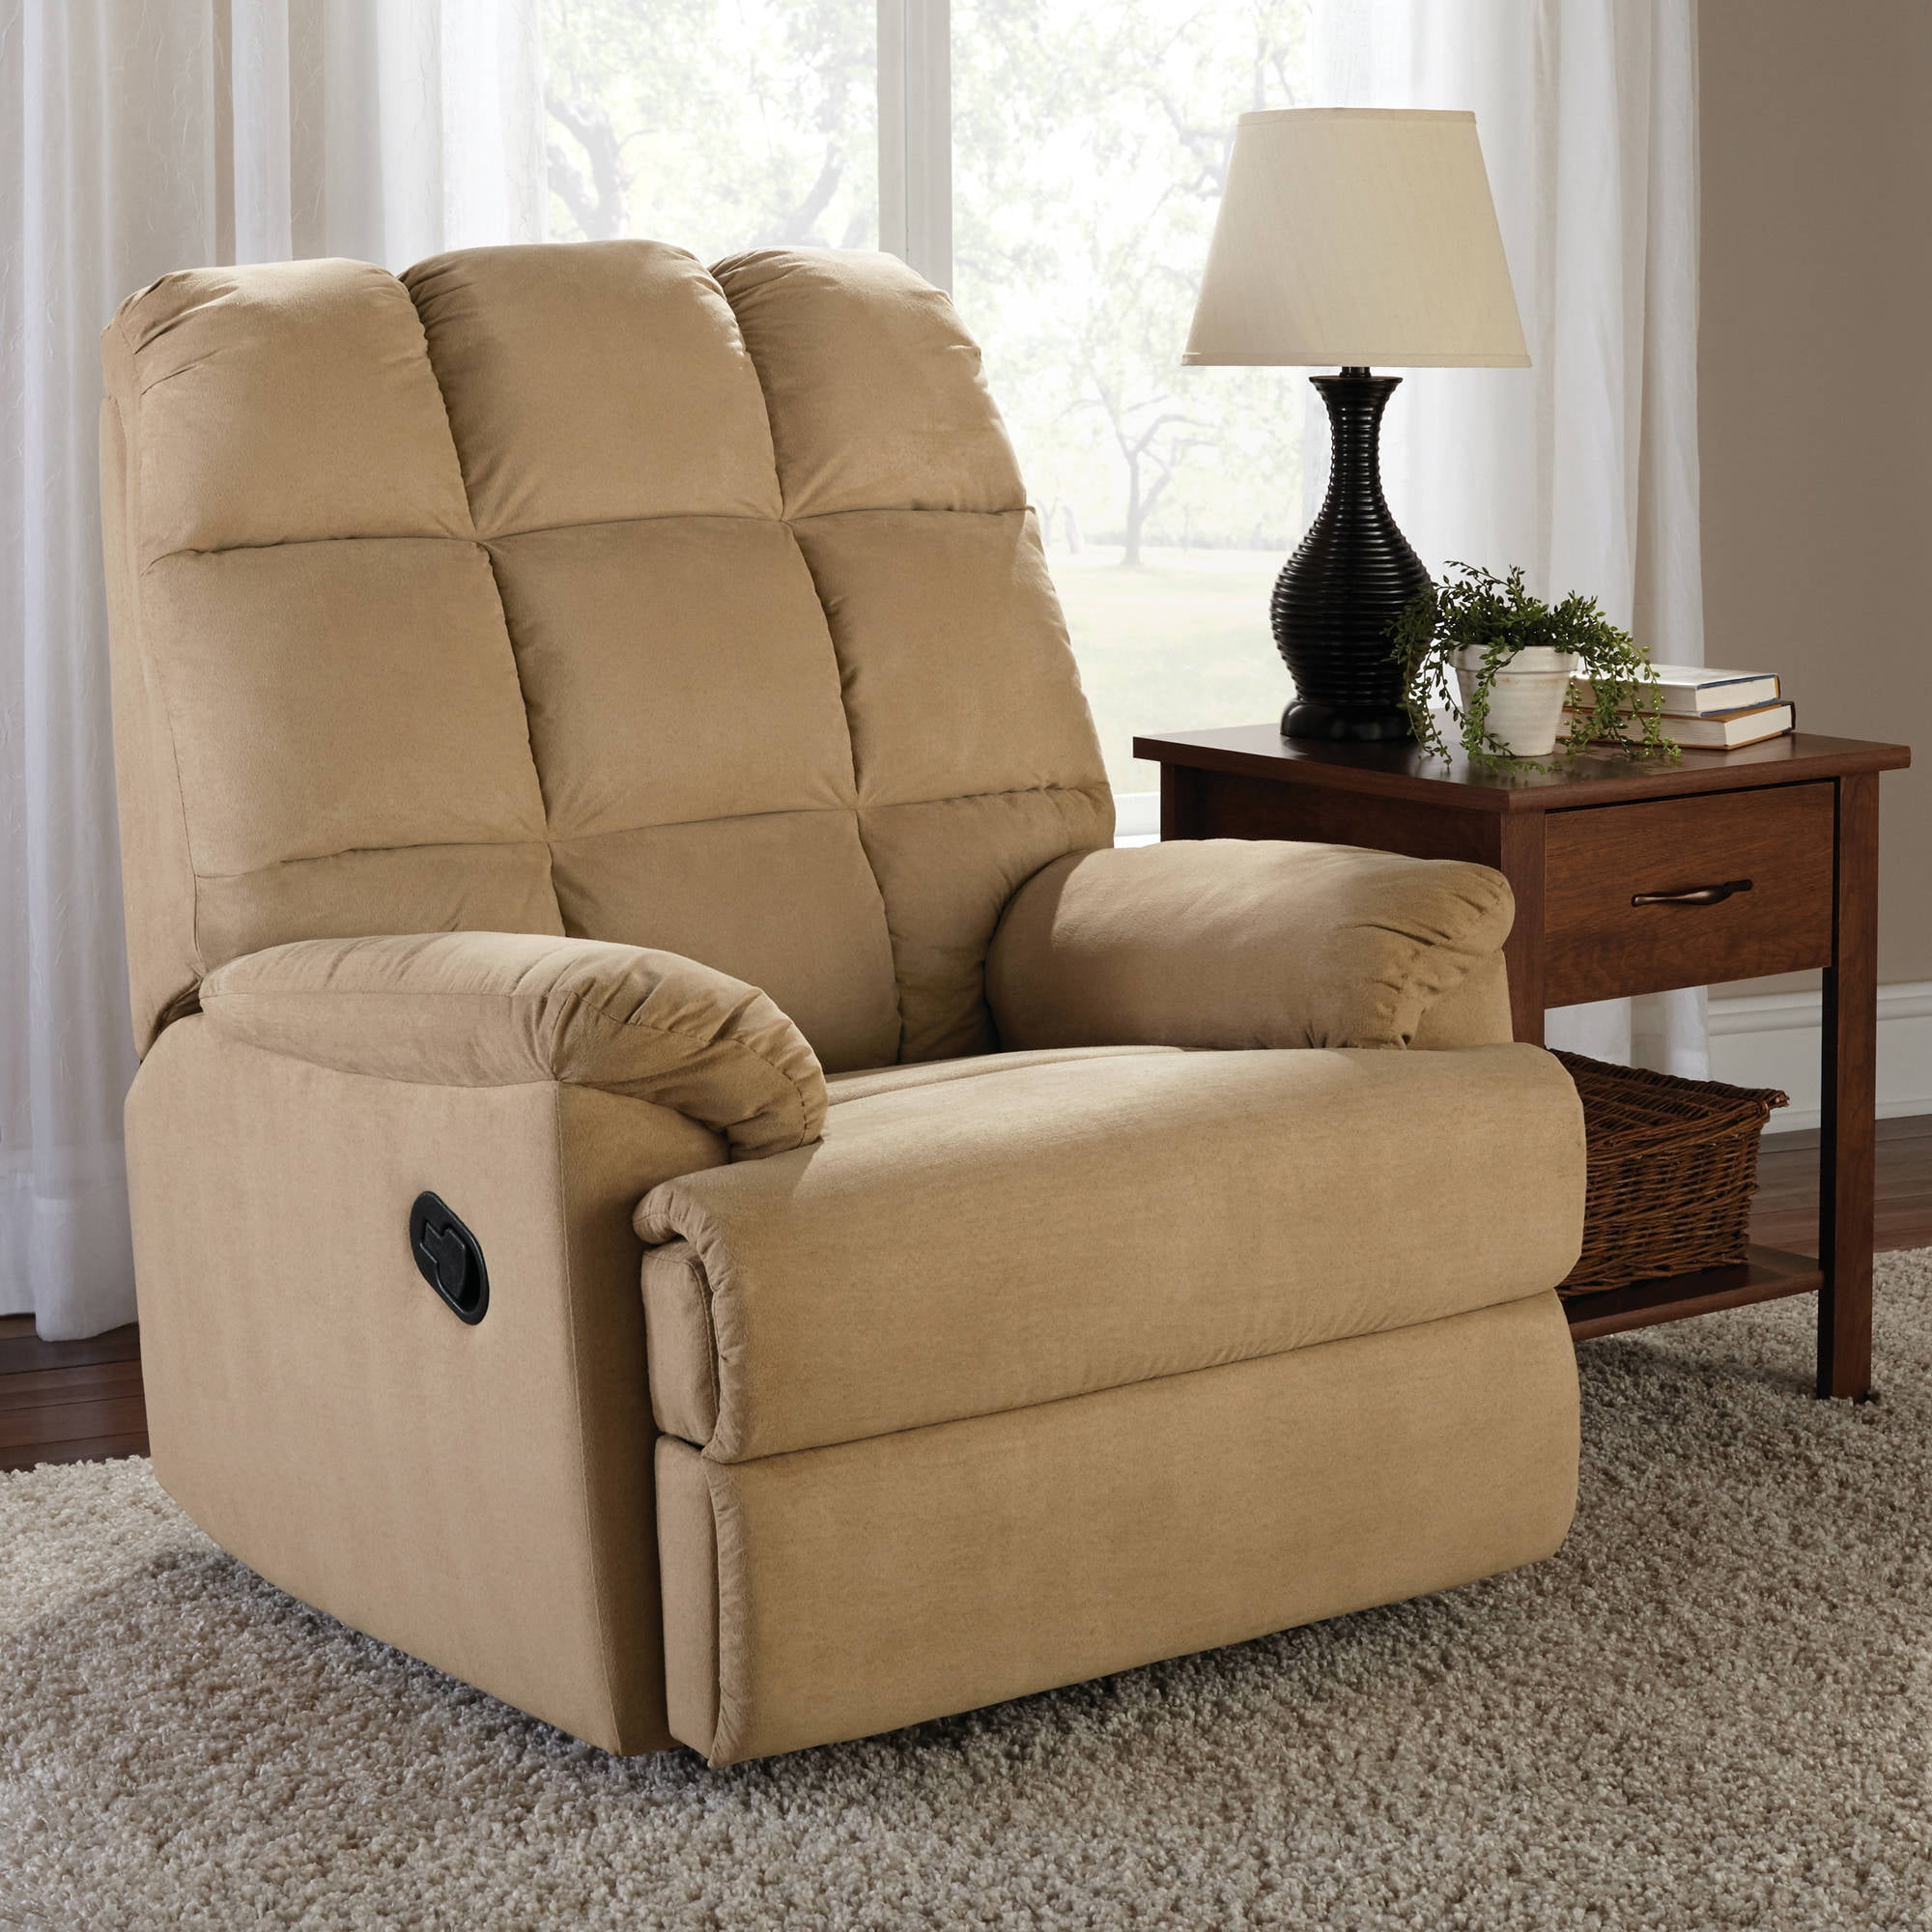 Creatice Small Recliner Chair Walmart for Living room